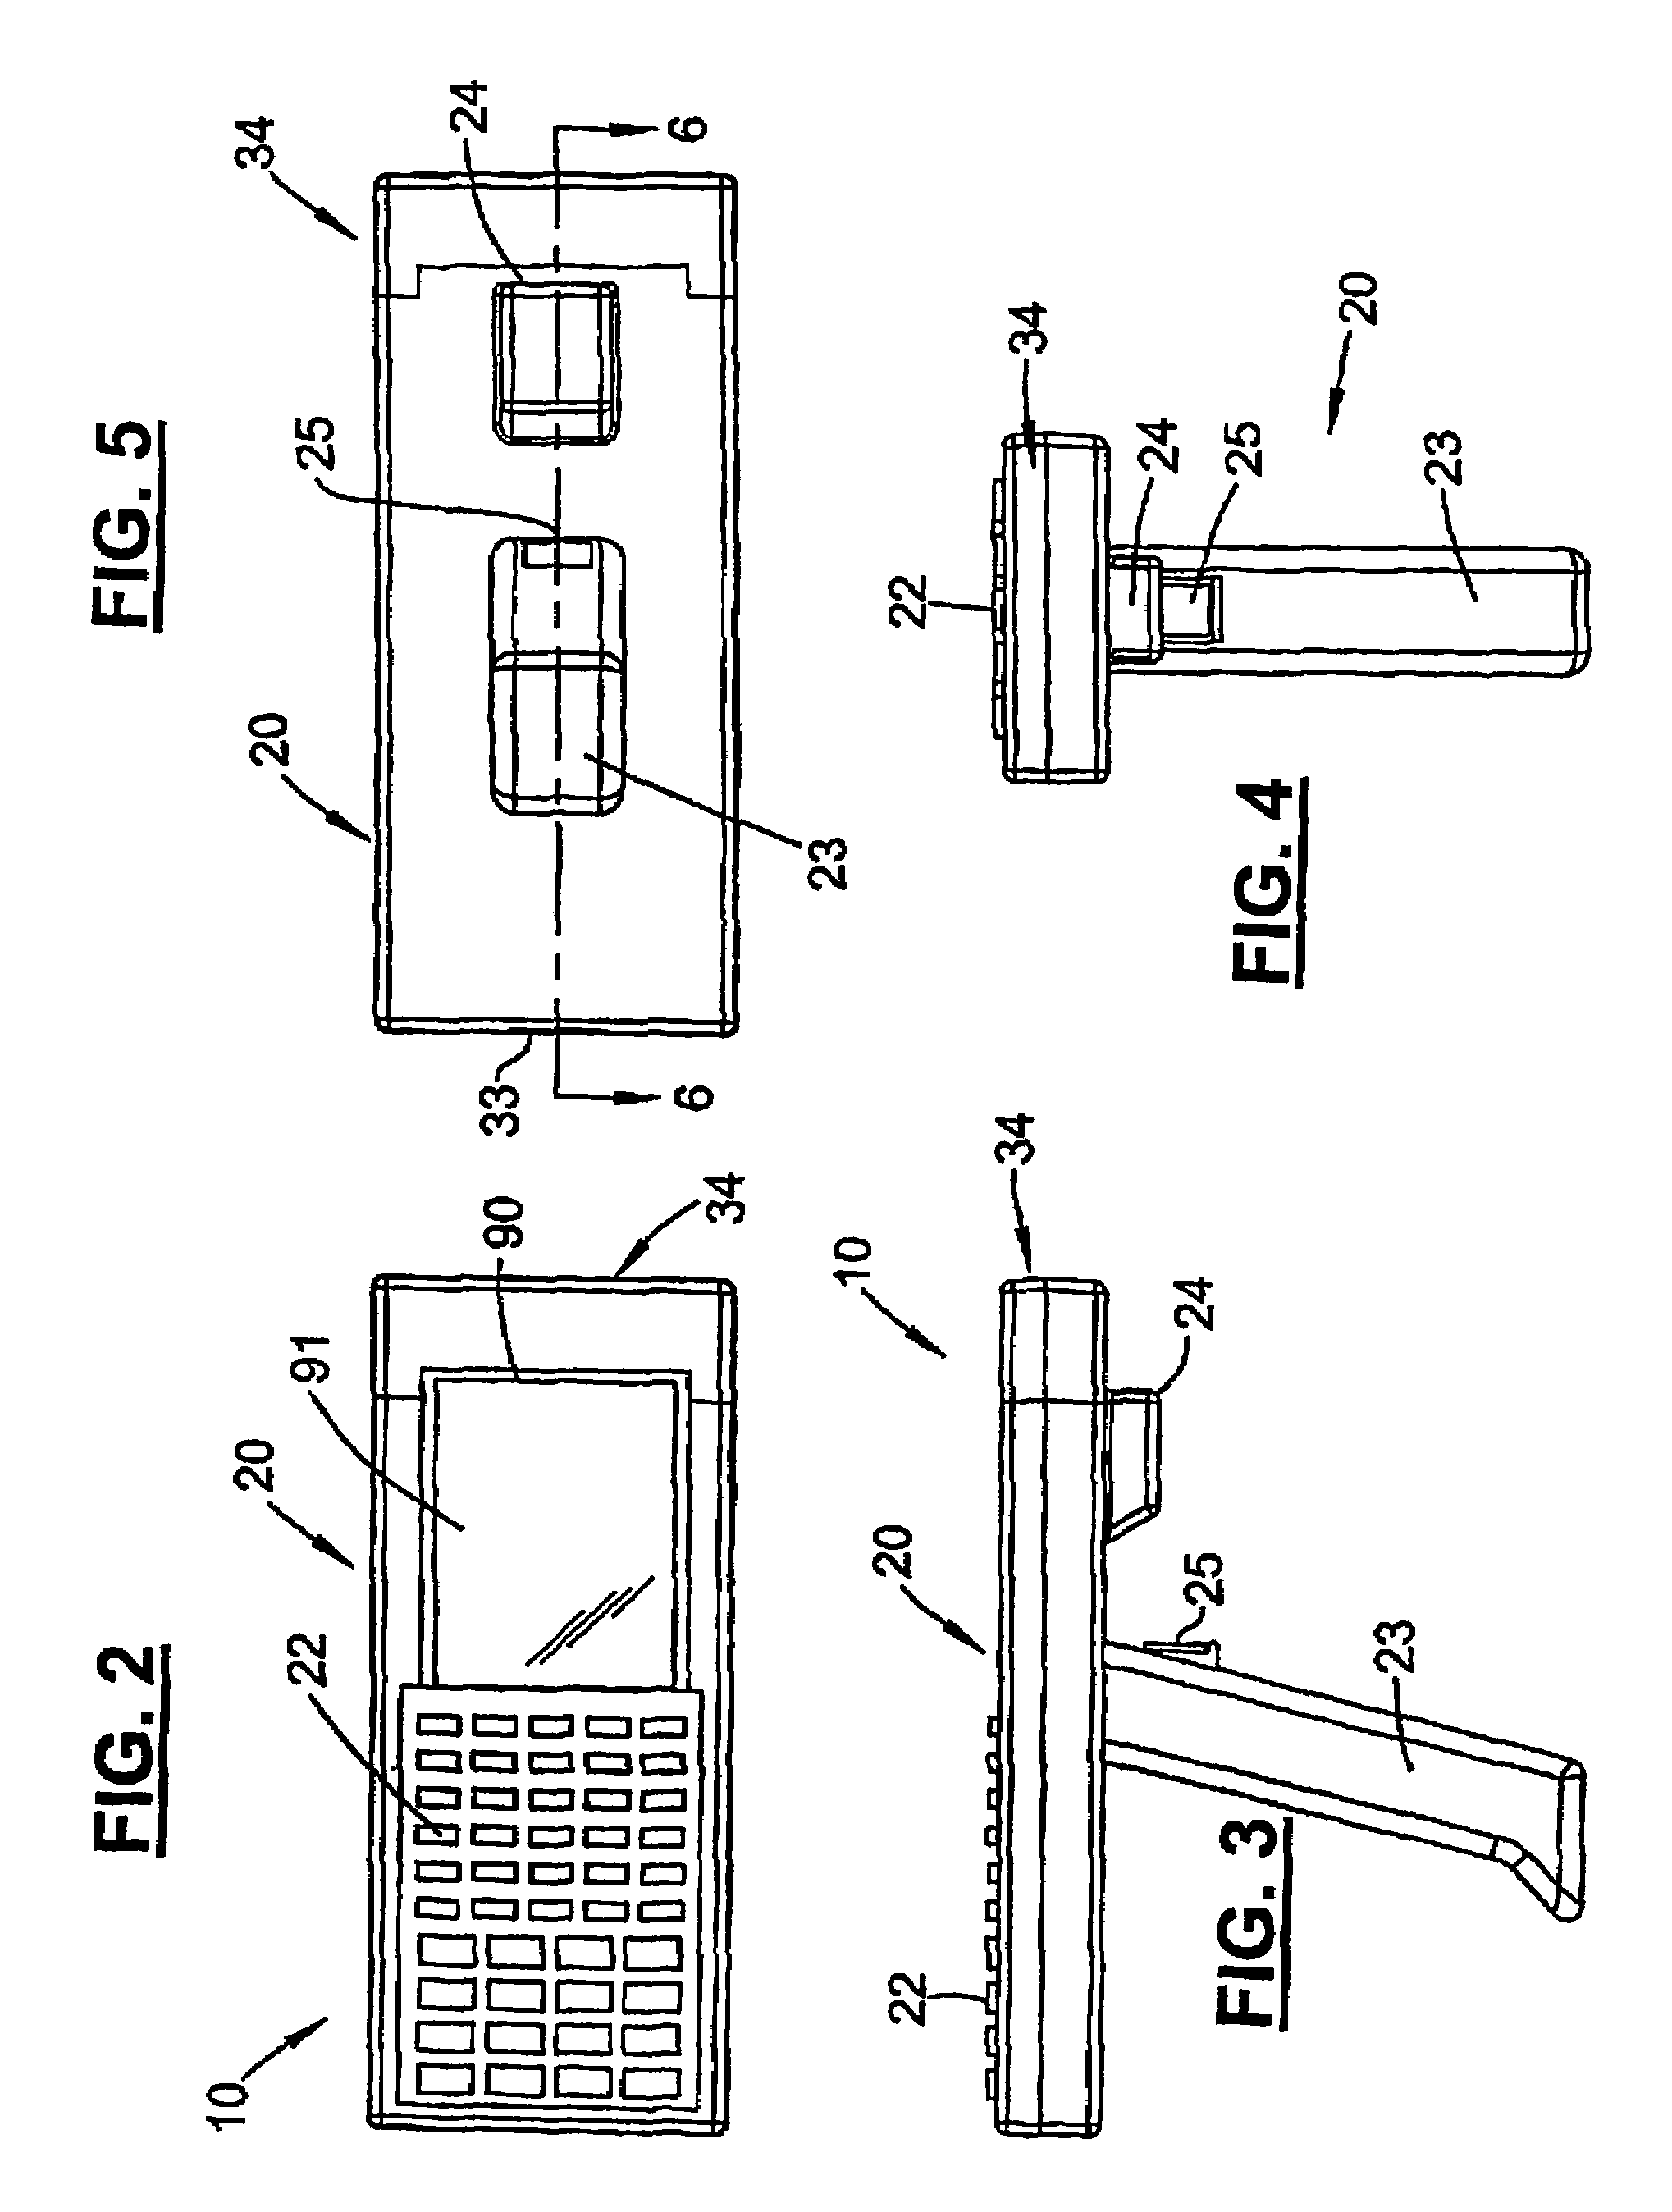 Portable data entry device with a detachable host PDA